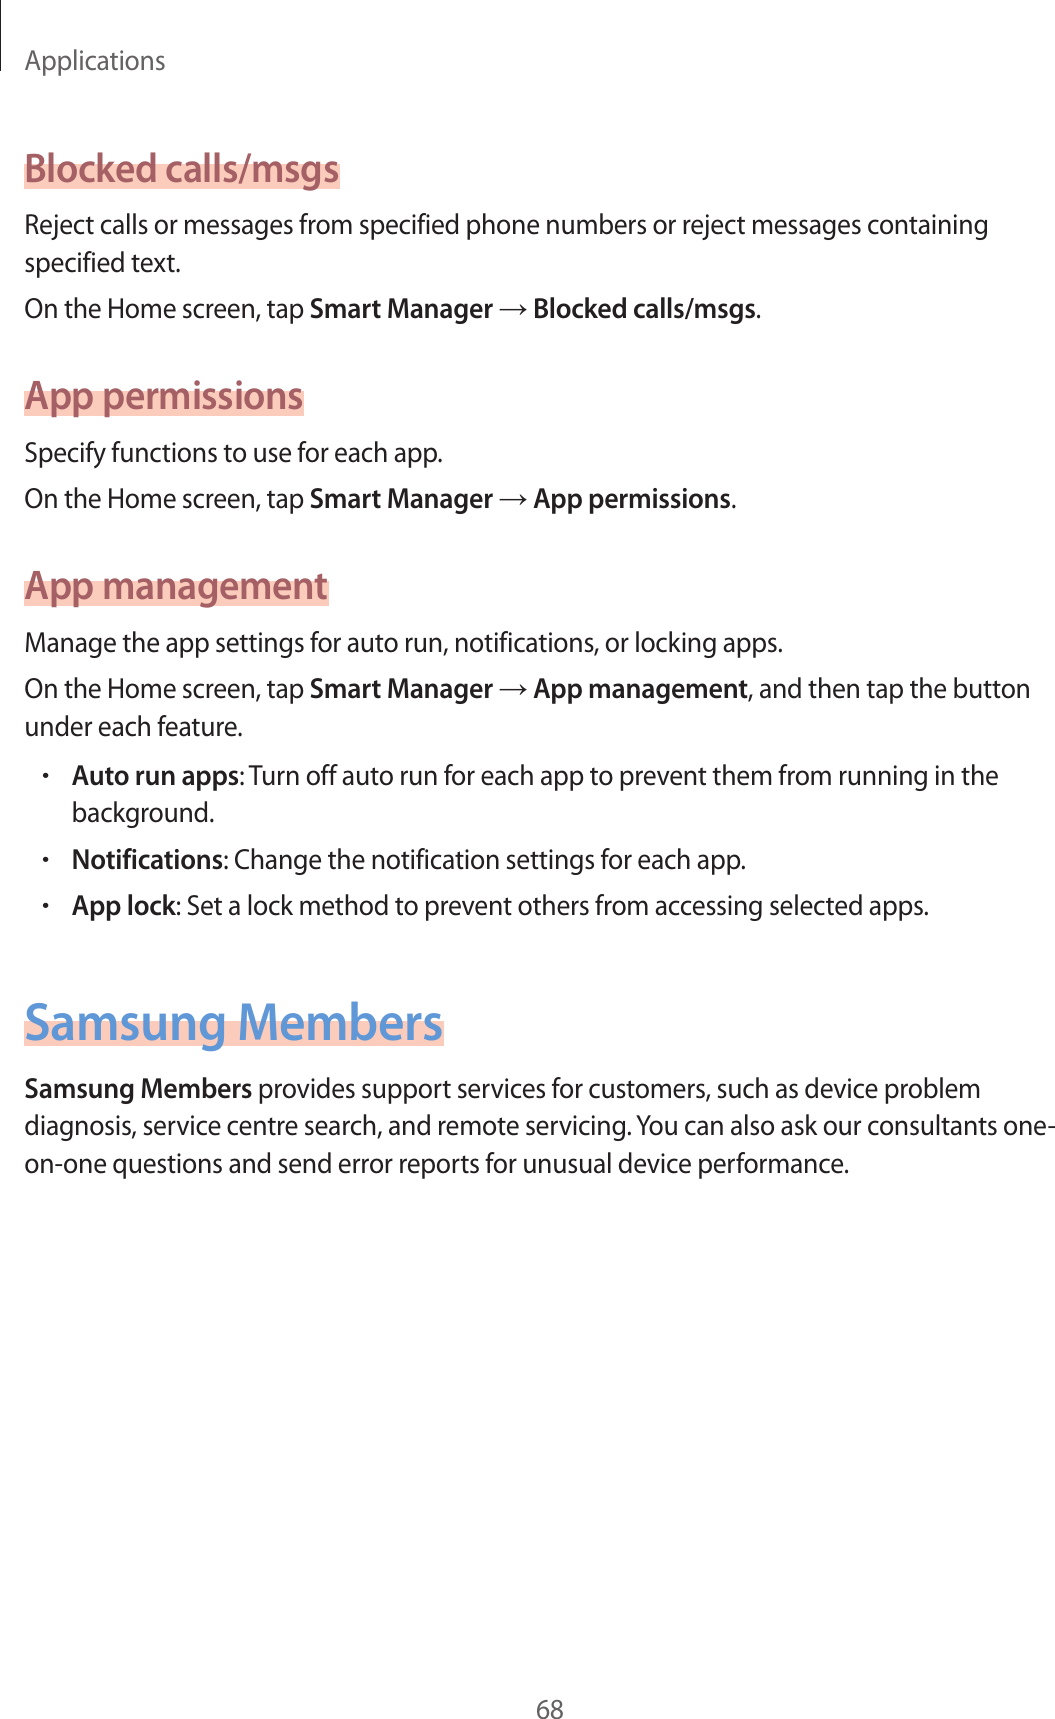 Applications68Blocked calls/msgsReject calls or messages from specified phone numbers or reject messages containing specified text.On the Home screen, tap Smart Manager → Blocked calls/msgs.App permissionsSpecify functions to use for each app.On the Home screen, tap Smart Manager → App permissions.App managementManage the app settings for auto run, notifications, or locking apps.On the Home screen, tap Smart Manager → App management, and then tap the button under each feature.•Auto run apps: Turn off auto run for each app to prevent them from running in the background.•Notifications: Change the notification settings for each app.•App lock: Set a lock method to prevent others from accessing selected apps.Samsung MembersSamsung Members provides support services for customers, such as device problem diagnosis, service centre search, and remote servicing. You can also ask our consultants one-on-one questions and send error reports for unusual device performance.